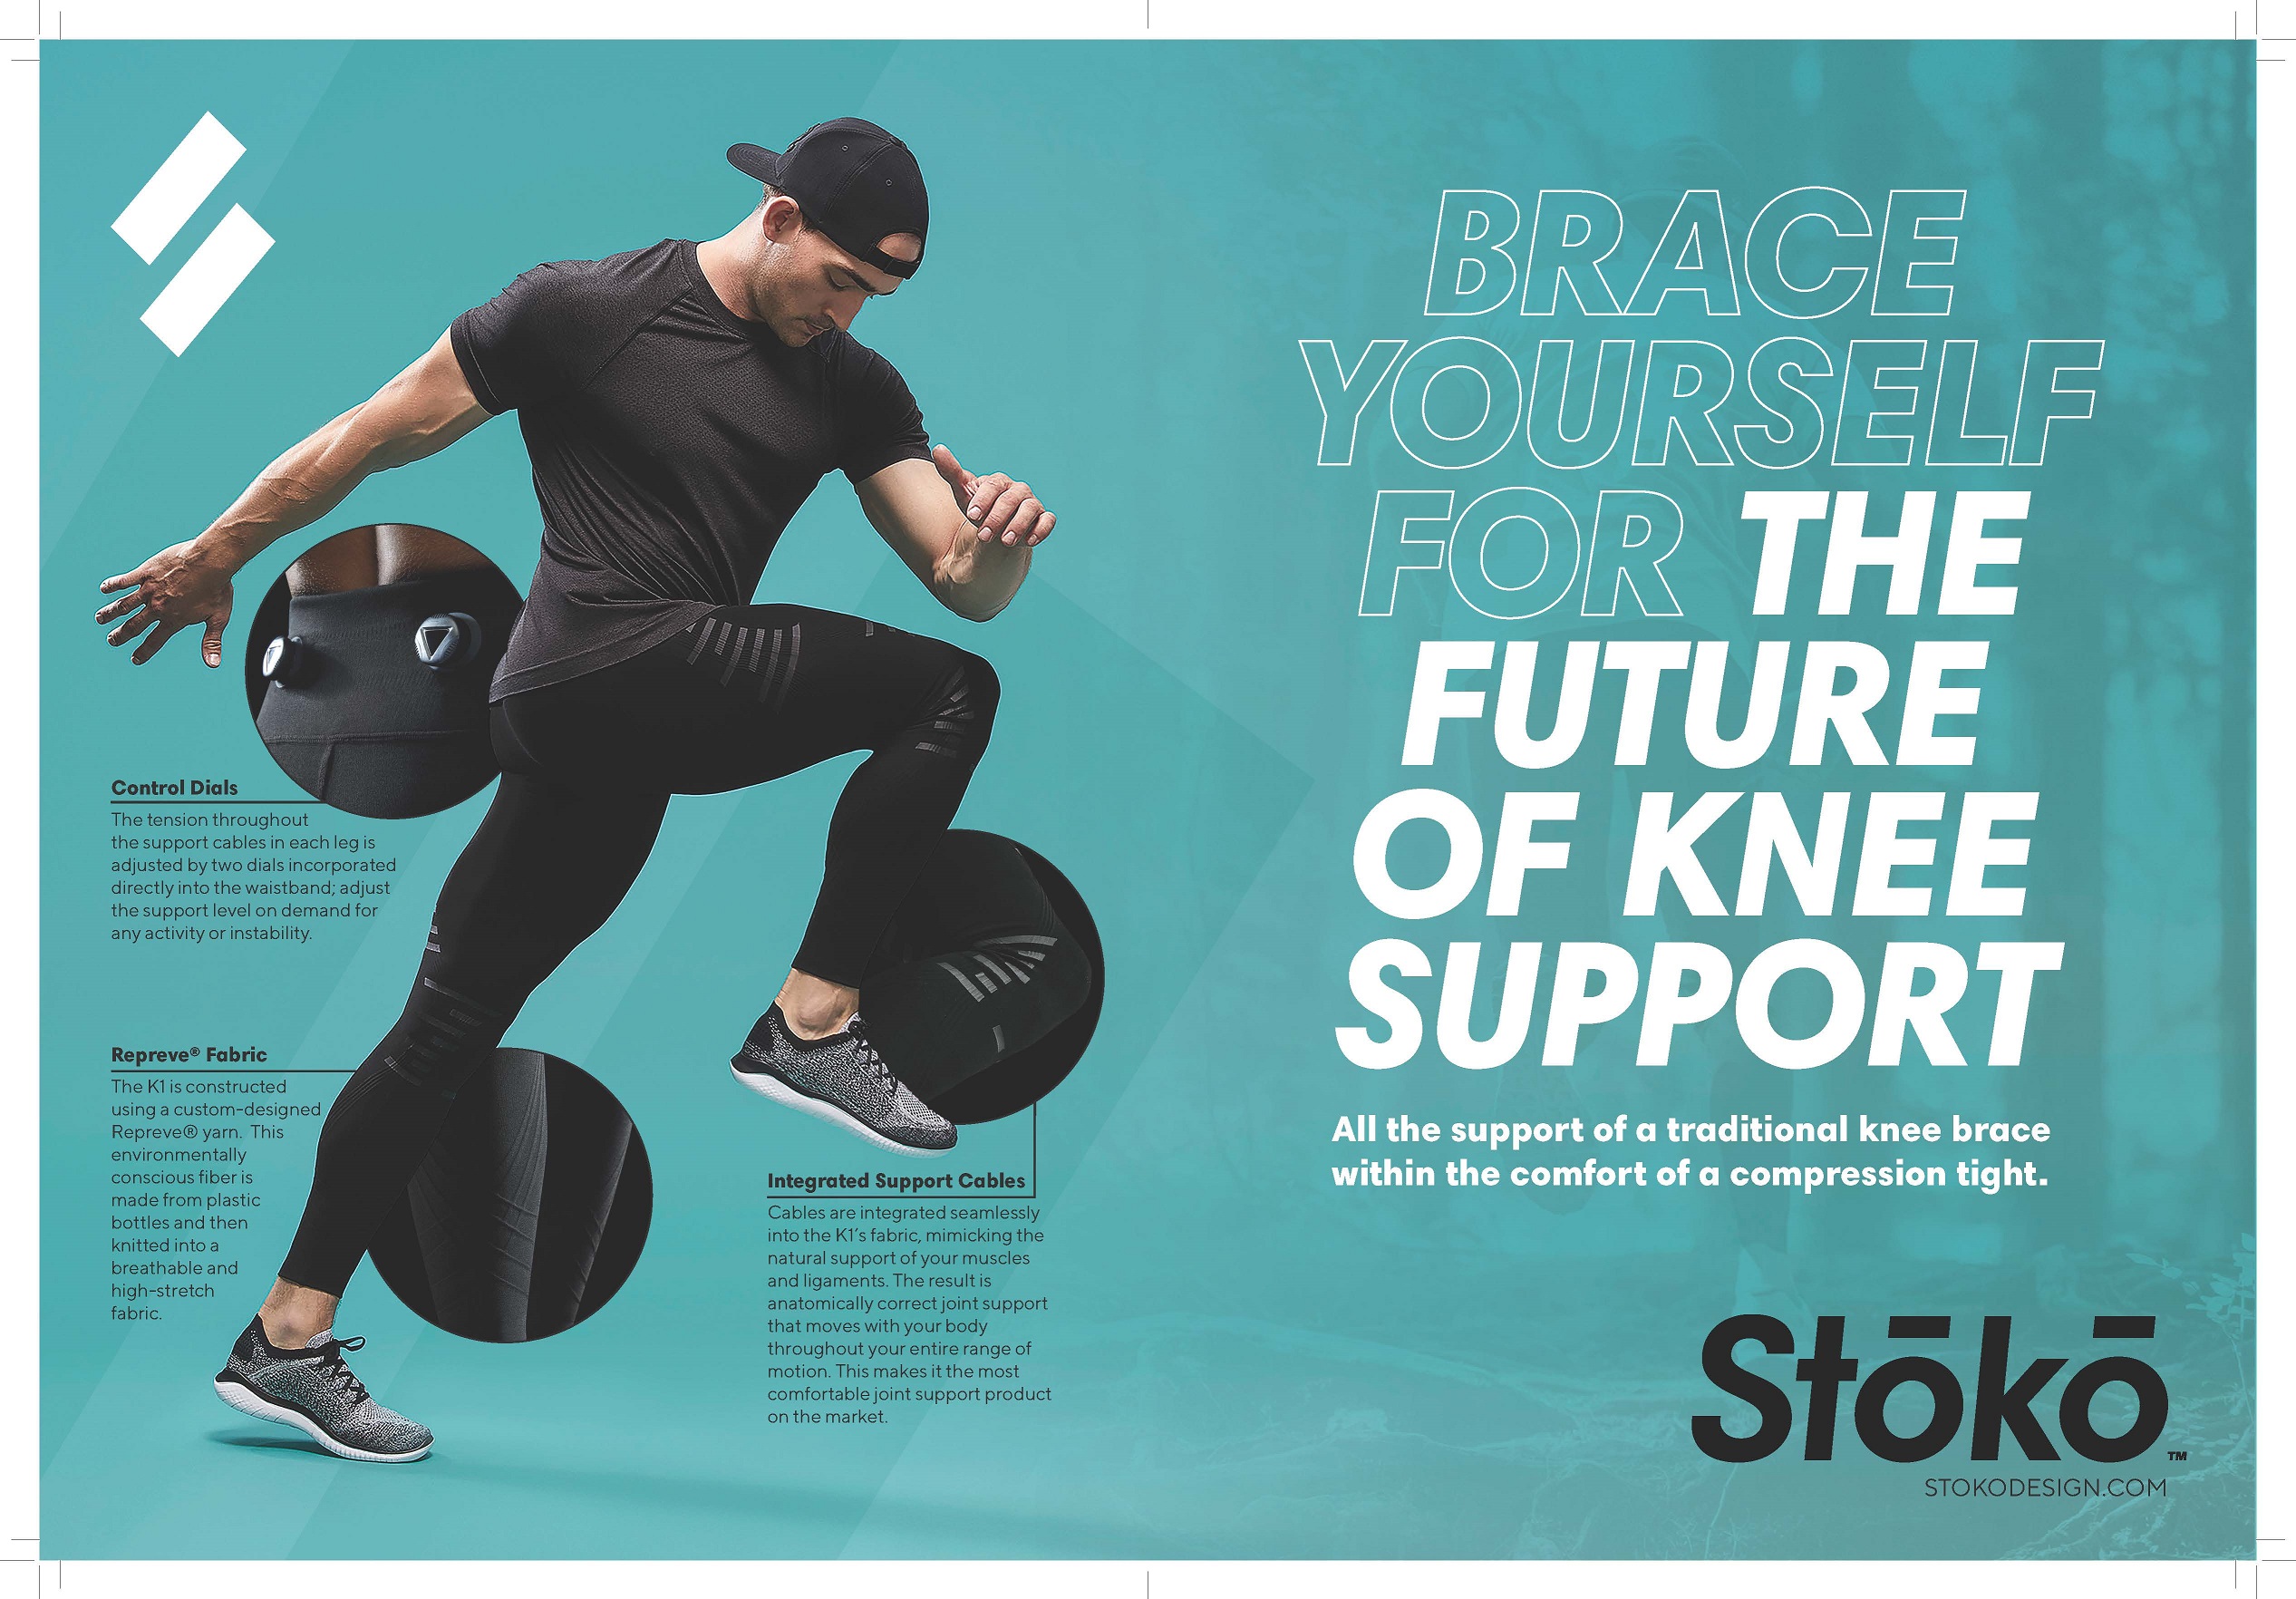 Stoko Design Inc. on X: I suffer from osteoarthritis in my hips